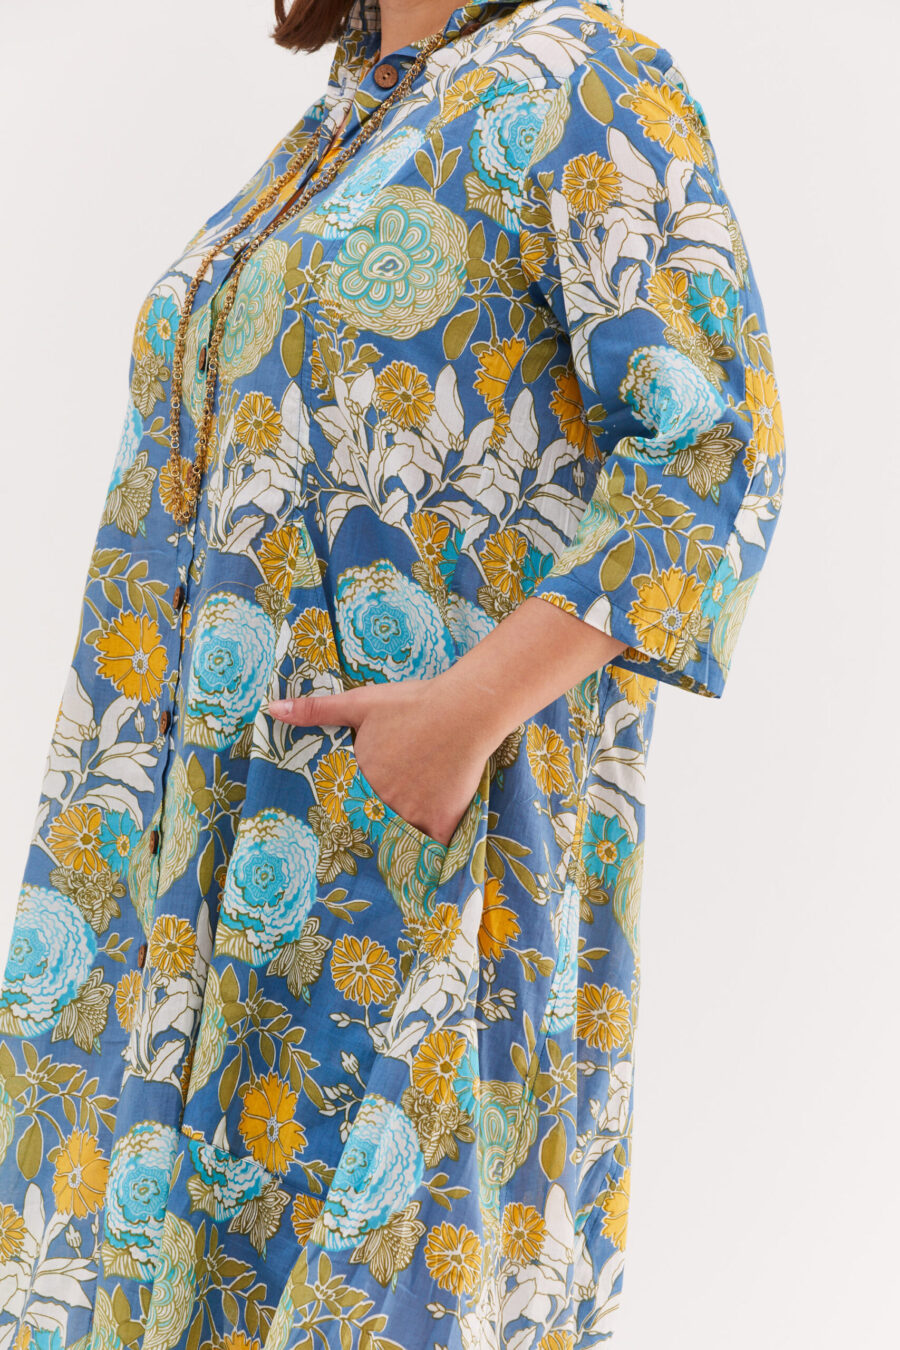 Aiya’le dress | Uniquely designed oversize dress - Blue blossom, colorful floral print on a blue dress by comfort zone boutique